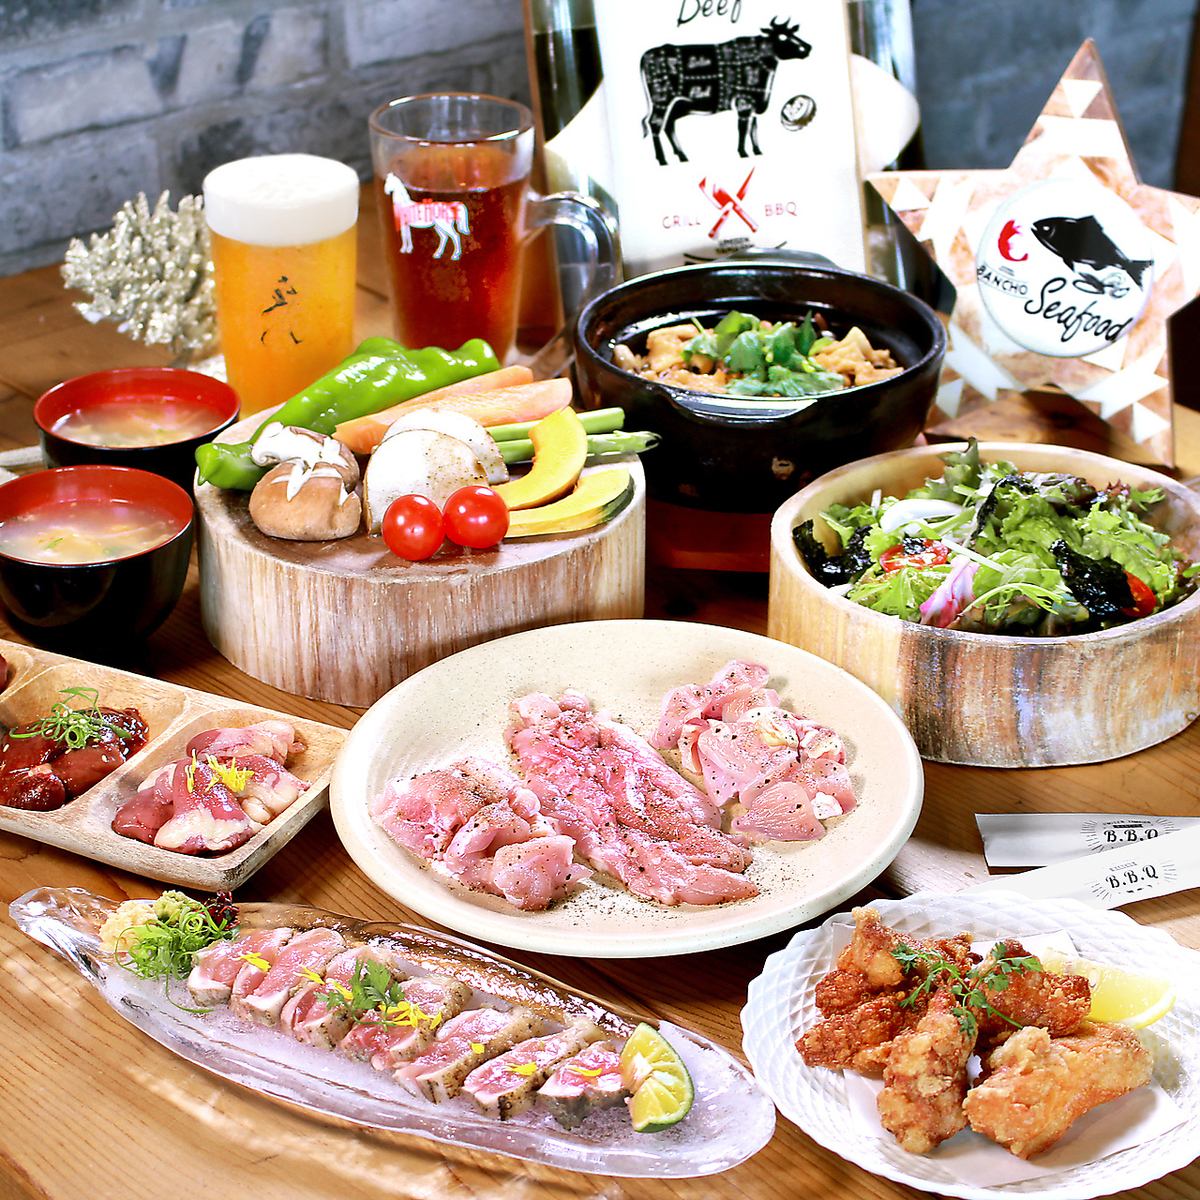 The course centered on fresh chicken dishes in the morning is 3980 yen with all-you-can-drink ★